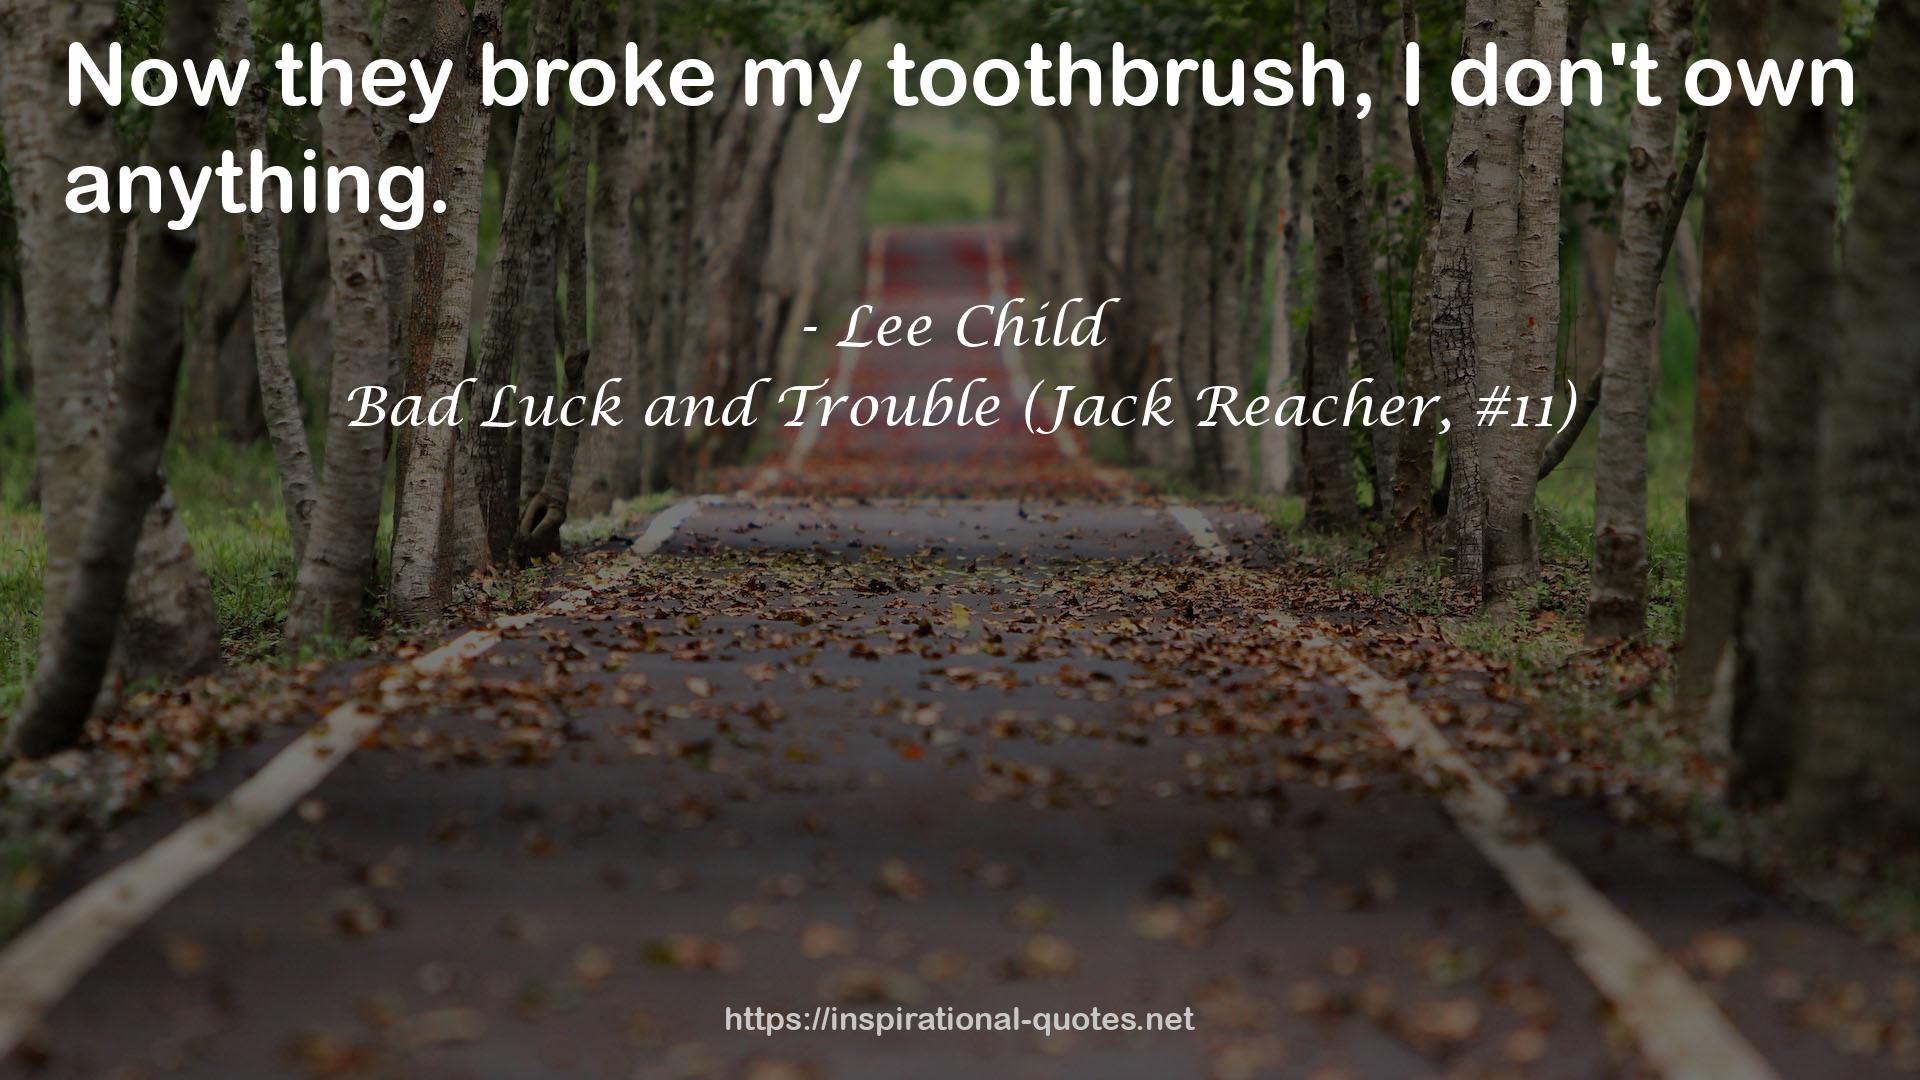 Bad Luck and Trouble (Jack Reacher, #11) QUOTES